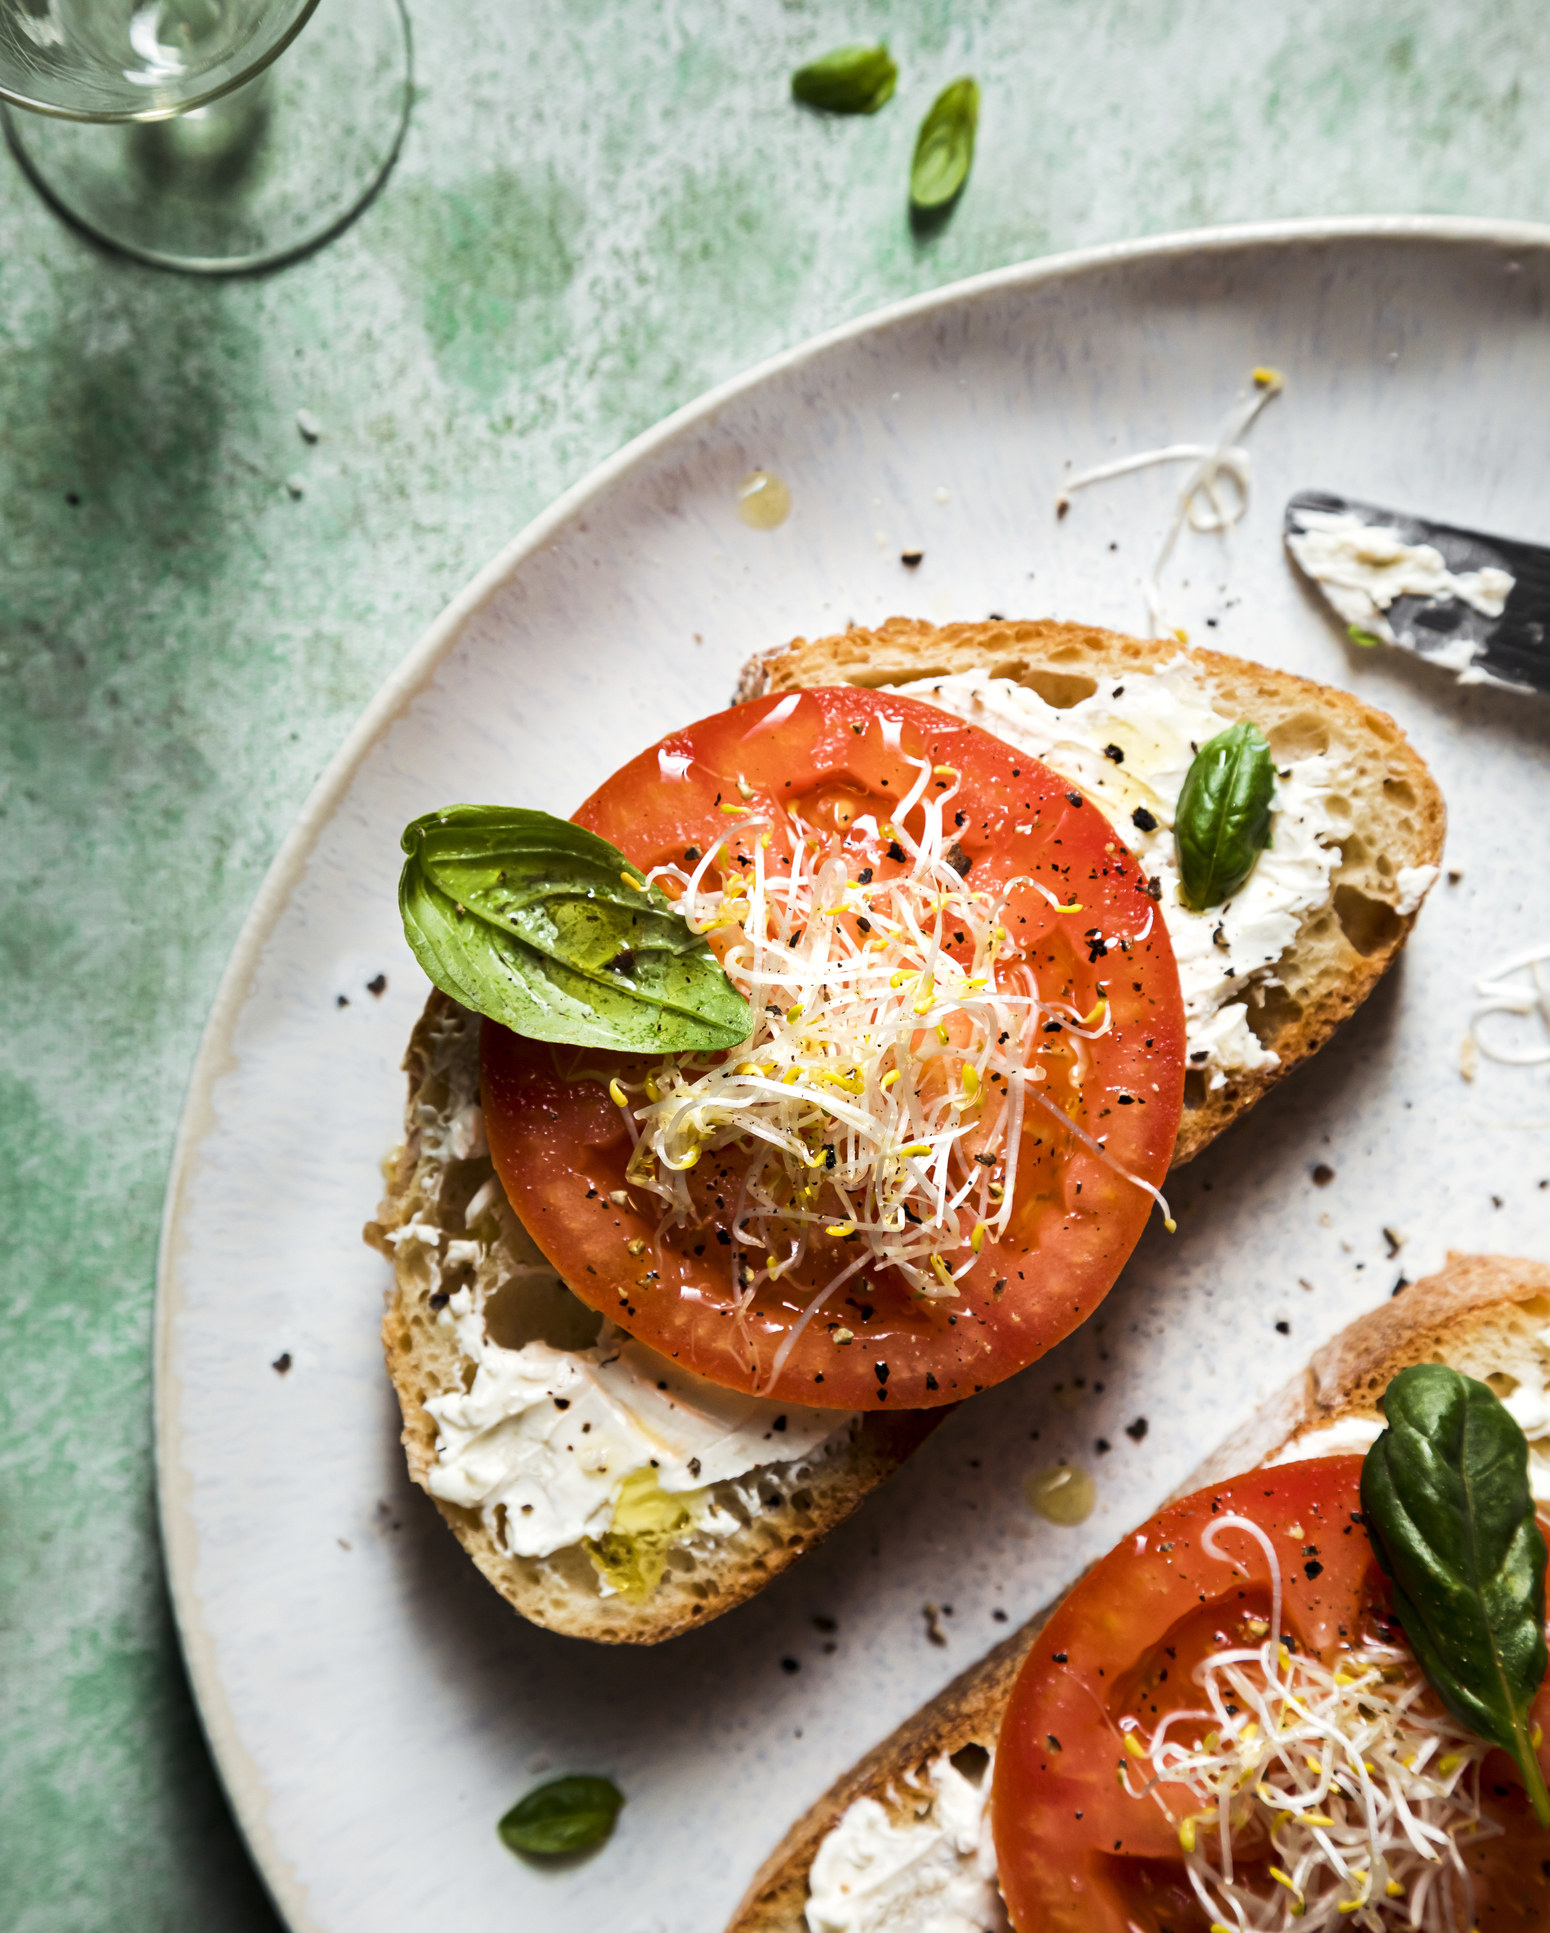 Open-faced tomato sandwich with mayonnaise and basil.